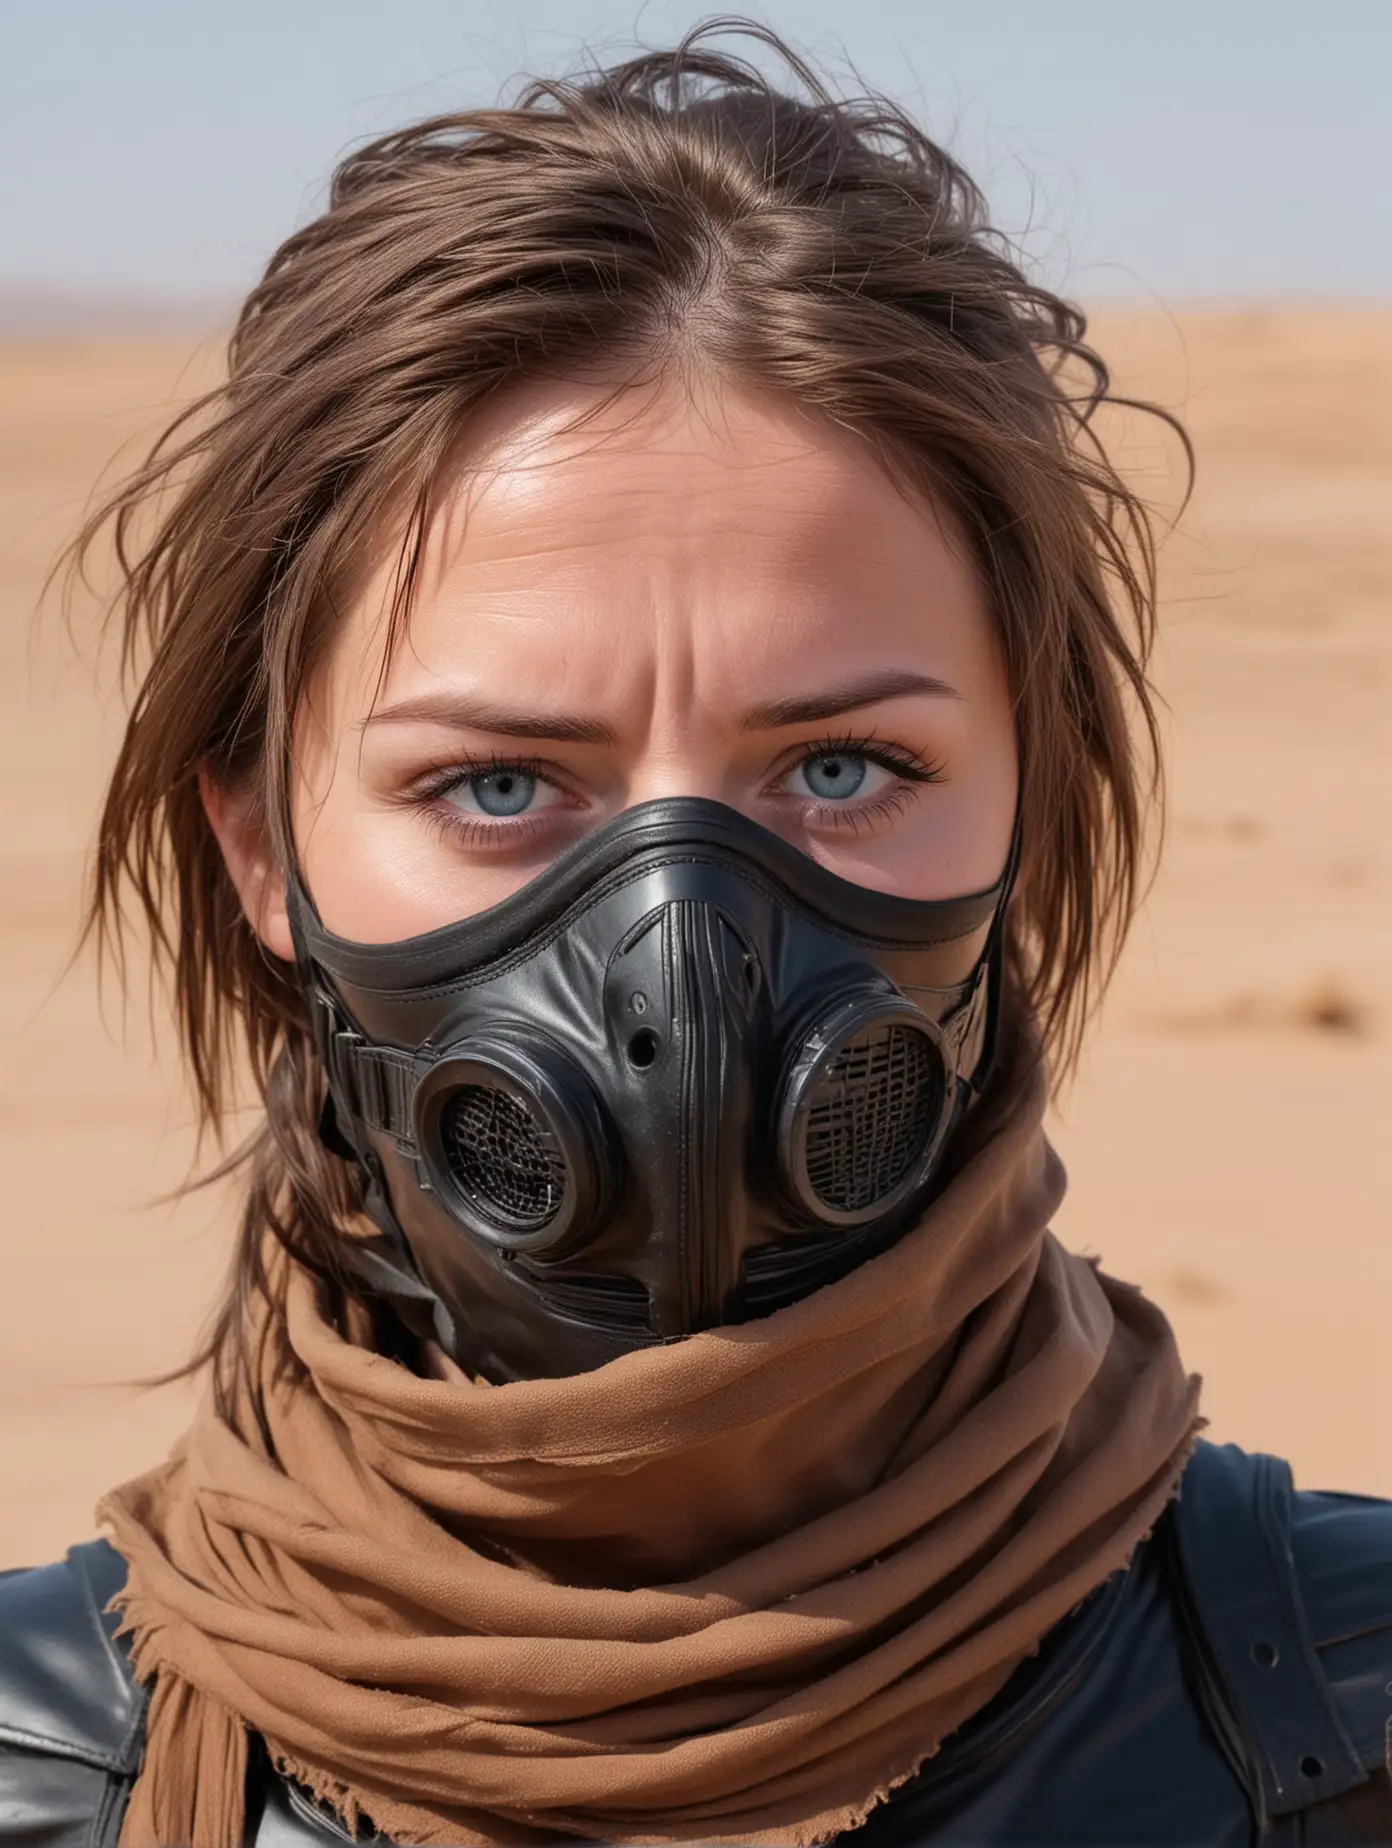  full portrait woman with weather-roughened skin, blue-on-blue eyes (blue sclera), wearing brown leather and a black stillsuit breathing mask covers her lower face. A dust scarf covers her hair. Desert background